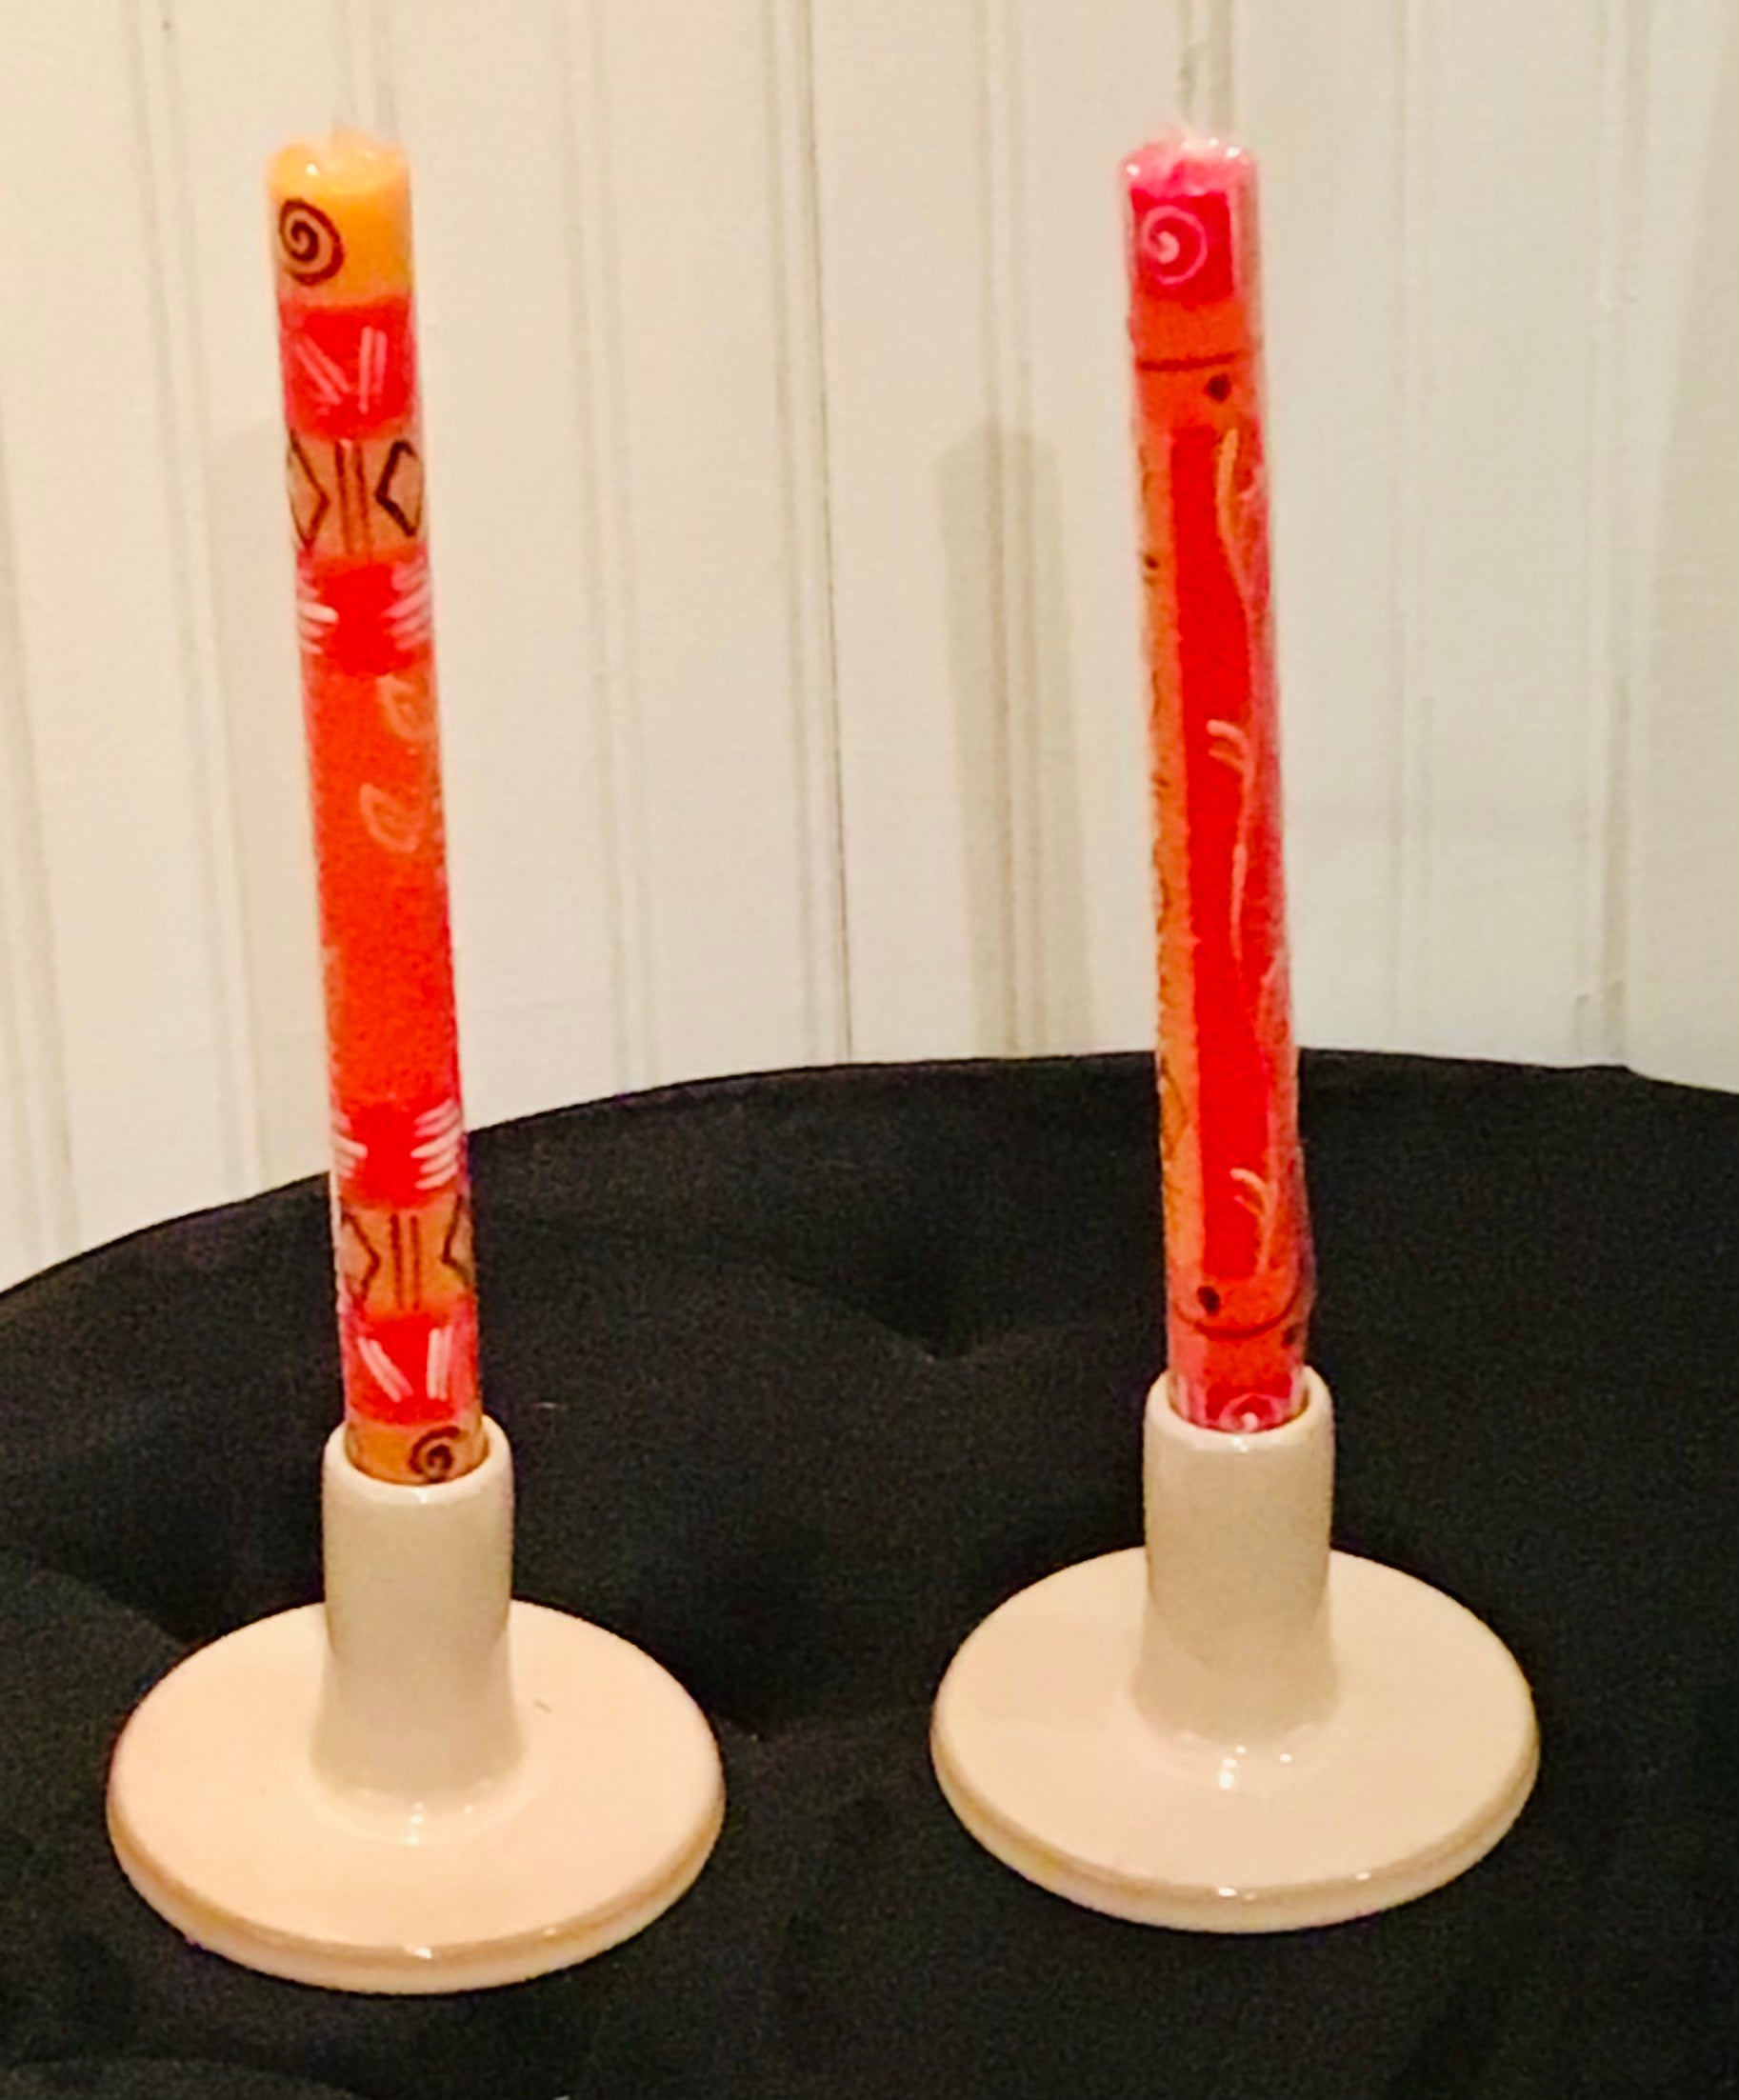 Handpainted Candles - YEHT CO.